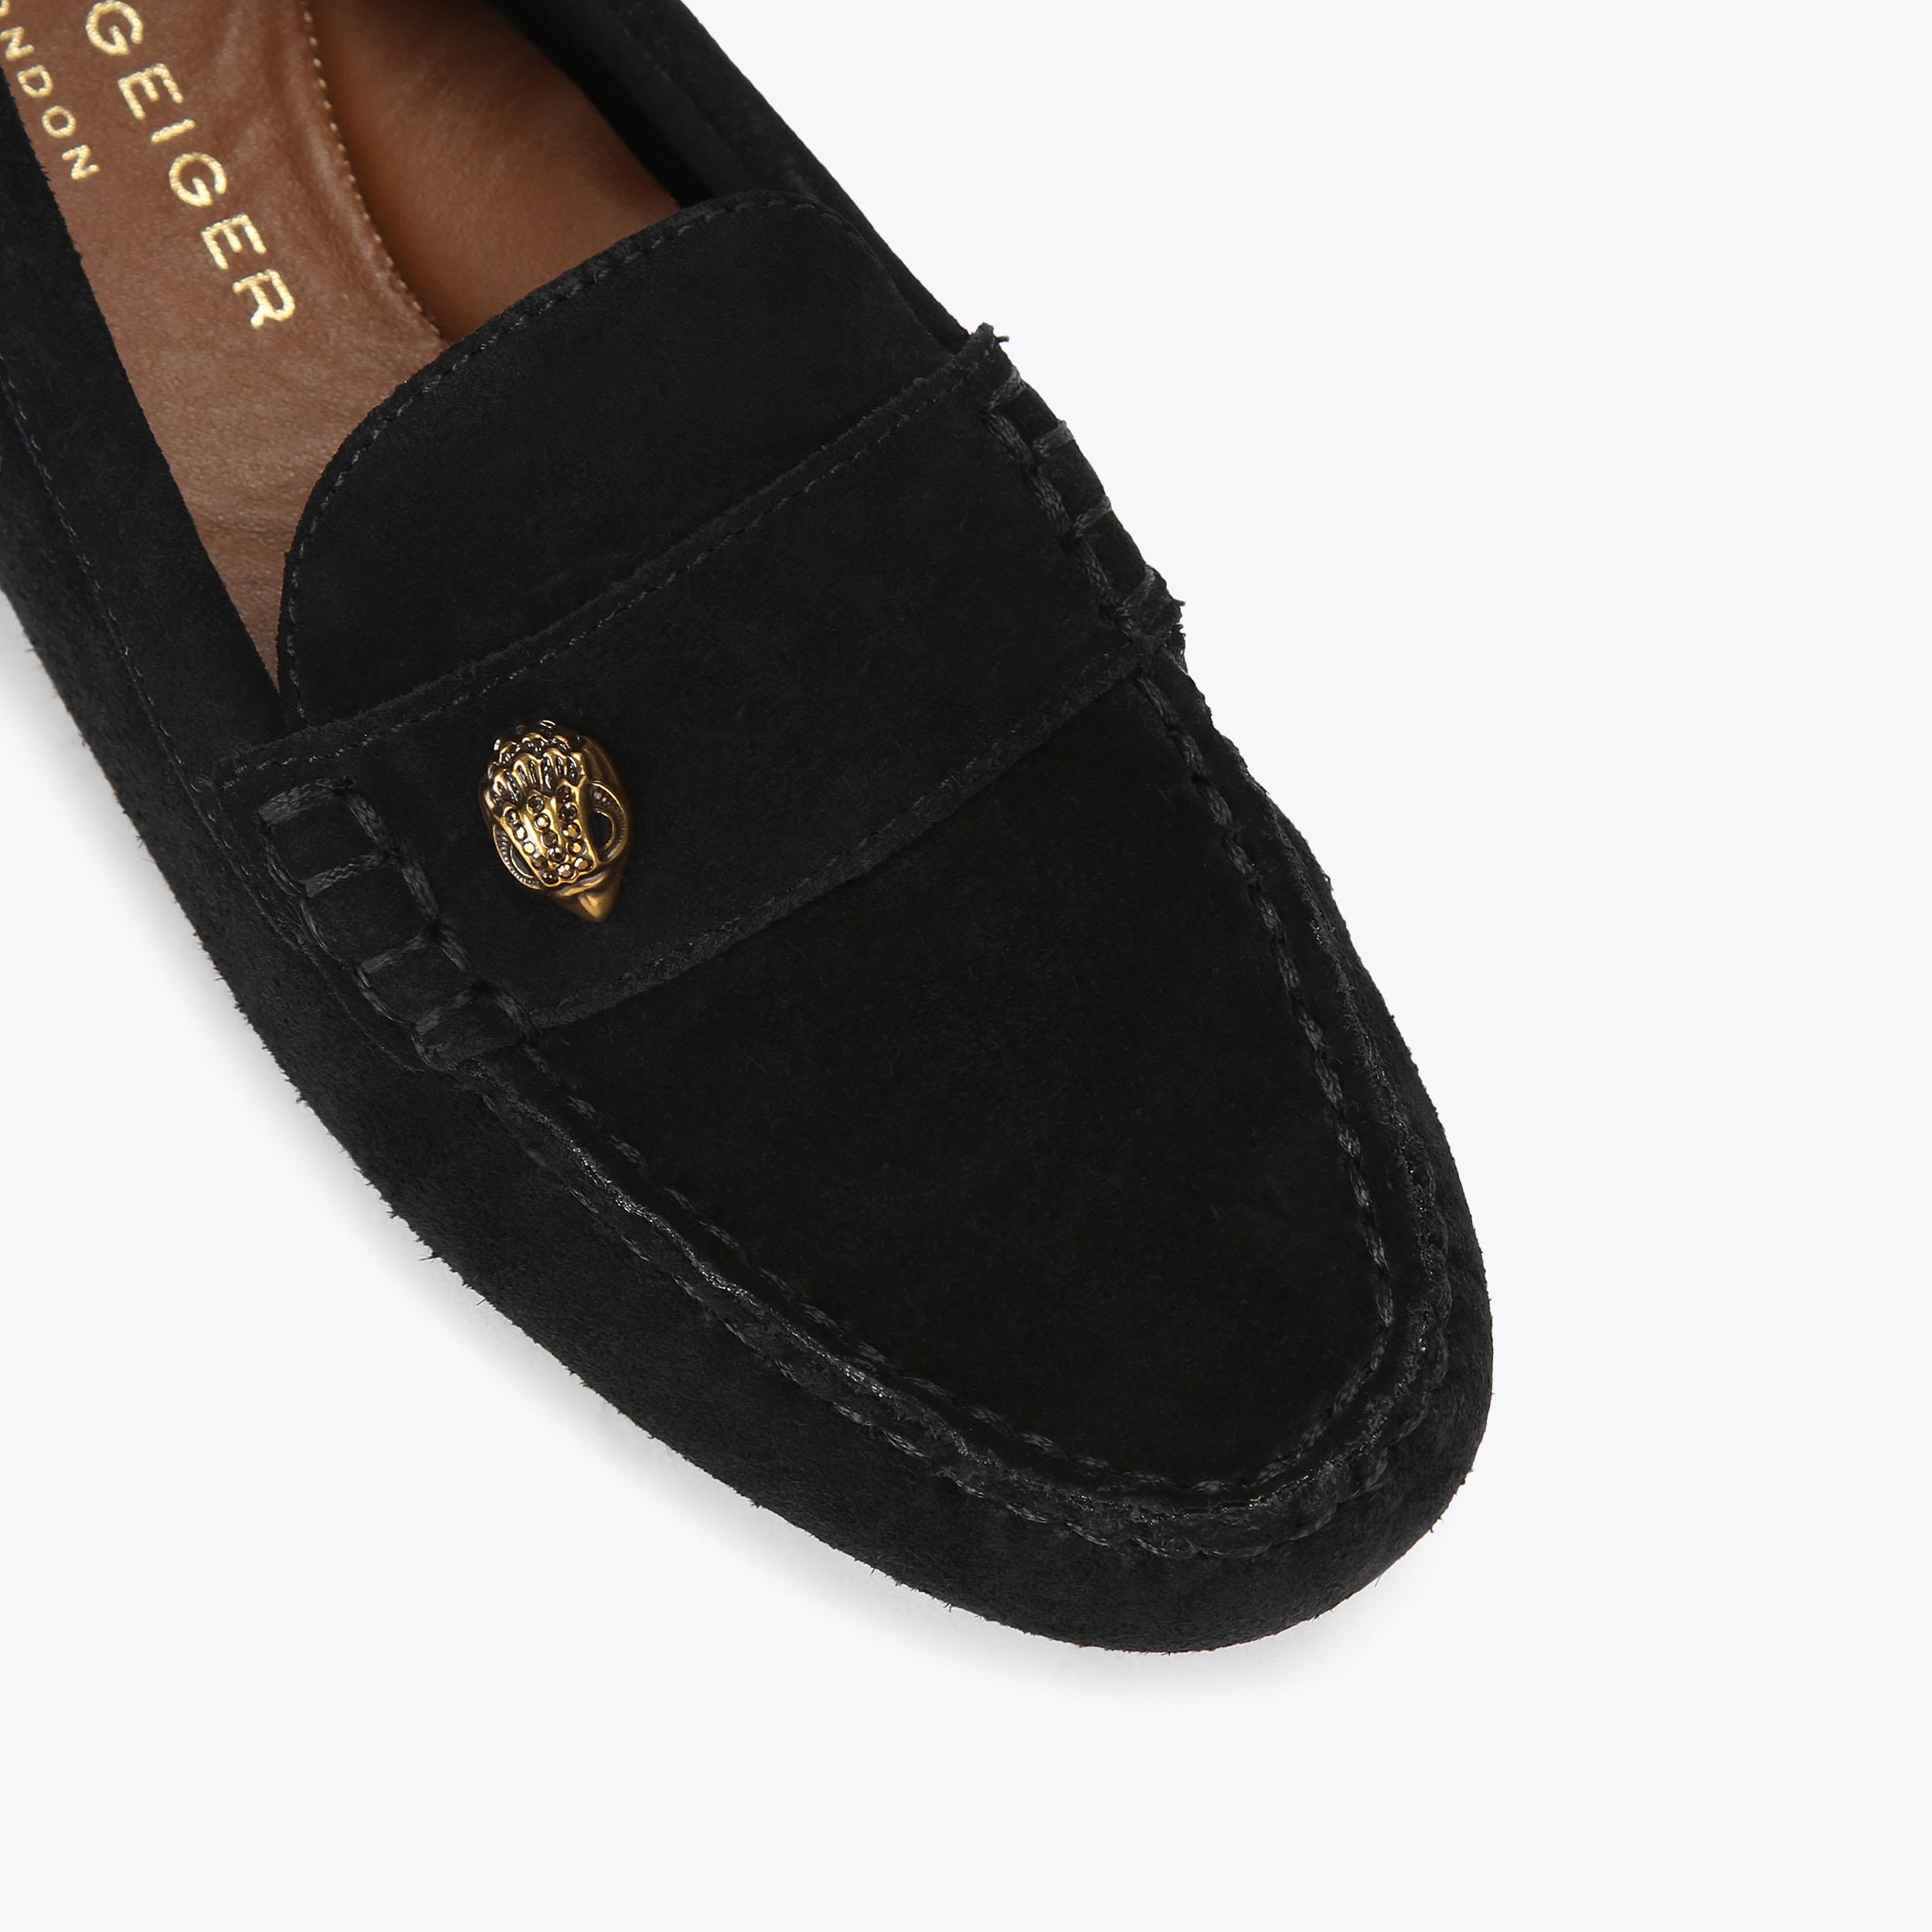 EAGLE DRIVER Black Suede Loafers by KURT GEIGER LONDON